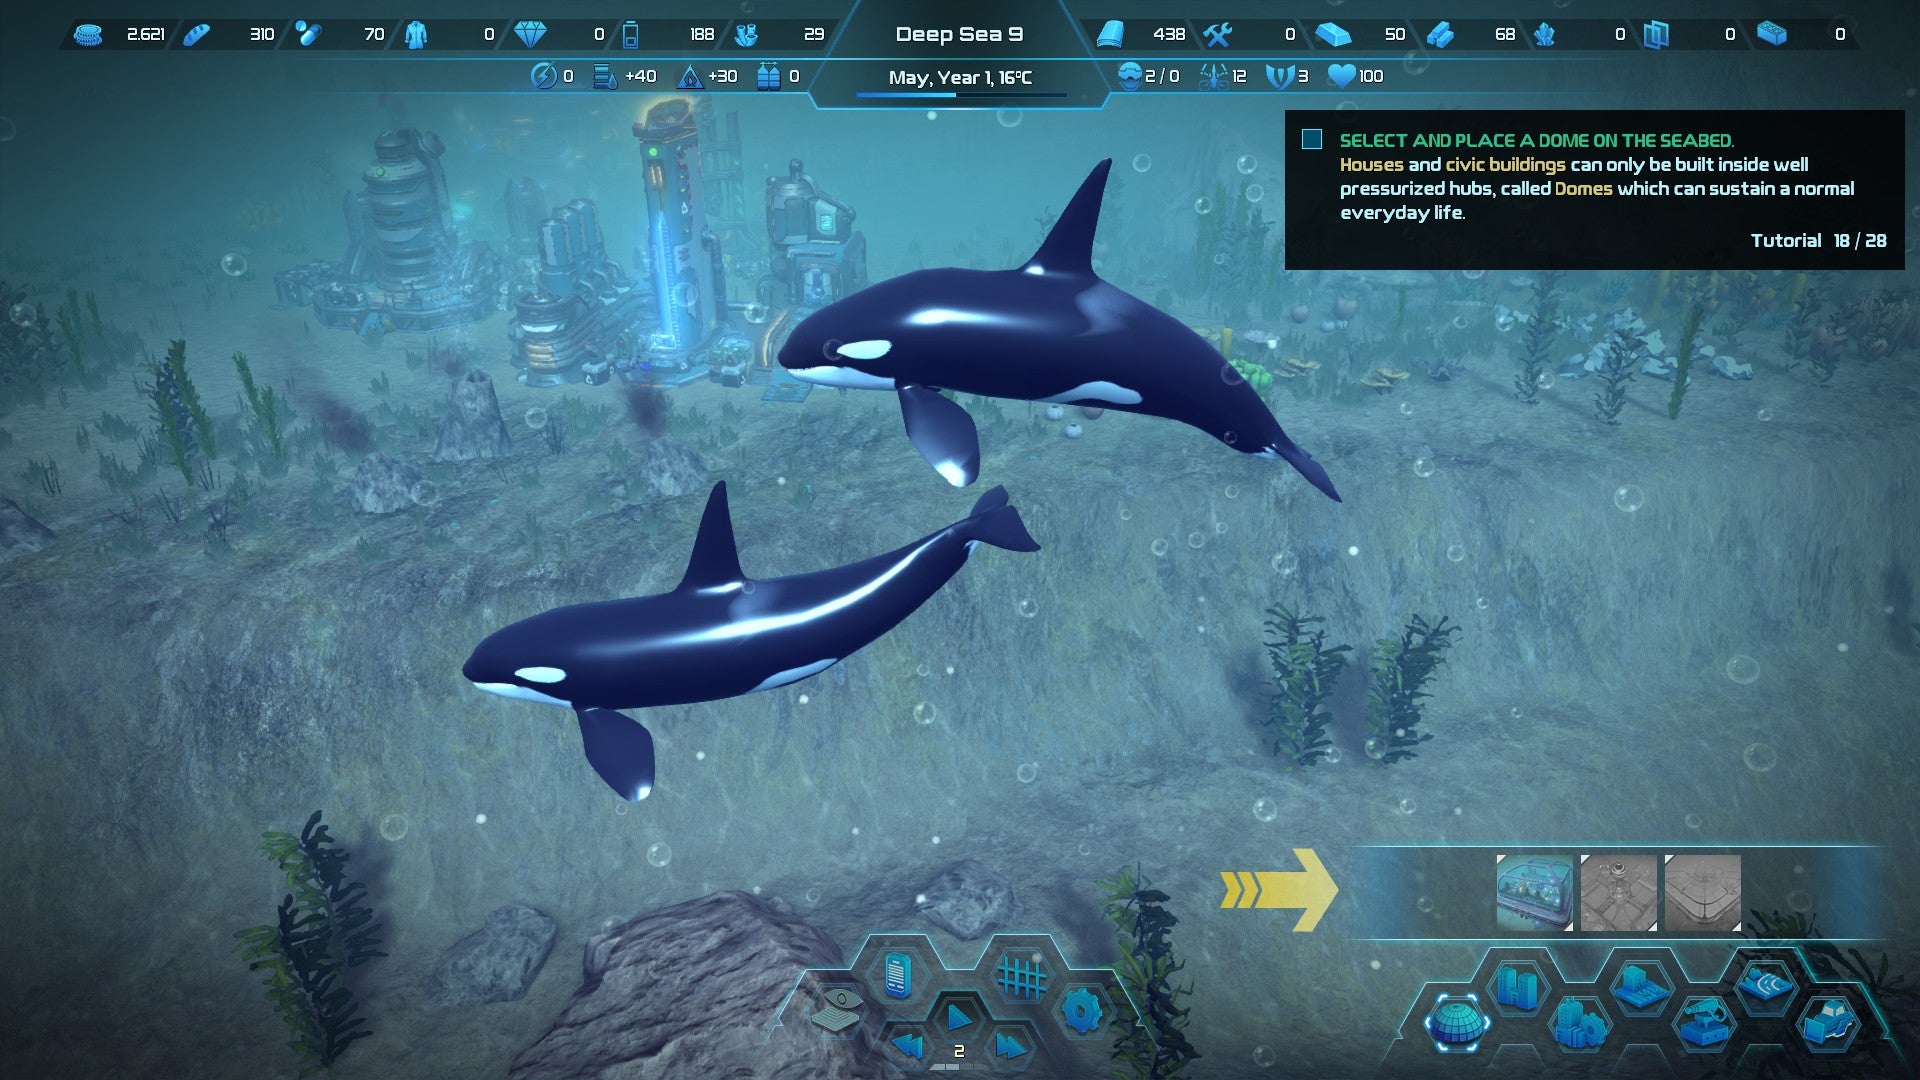 An Aquatico screenshot showing two killer whales swimming past an underwater city